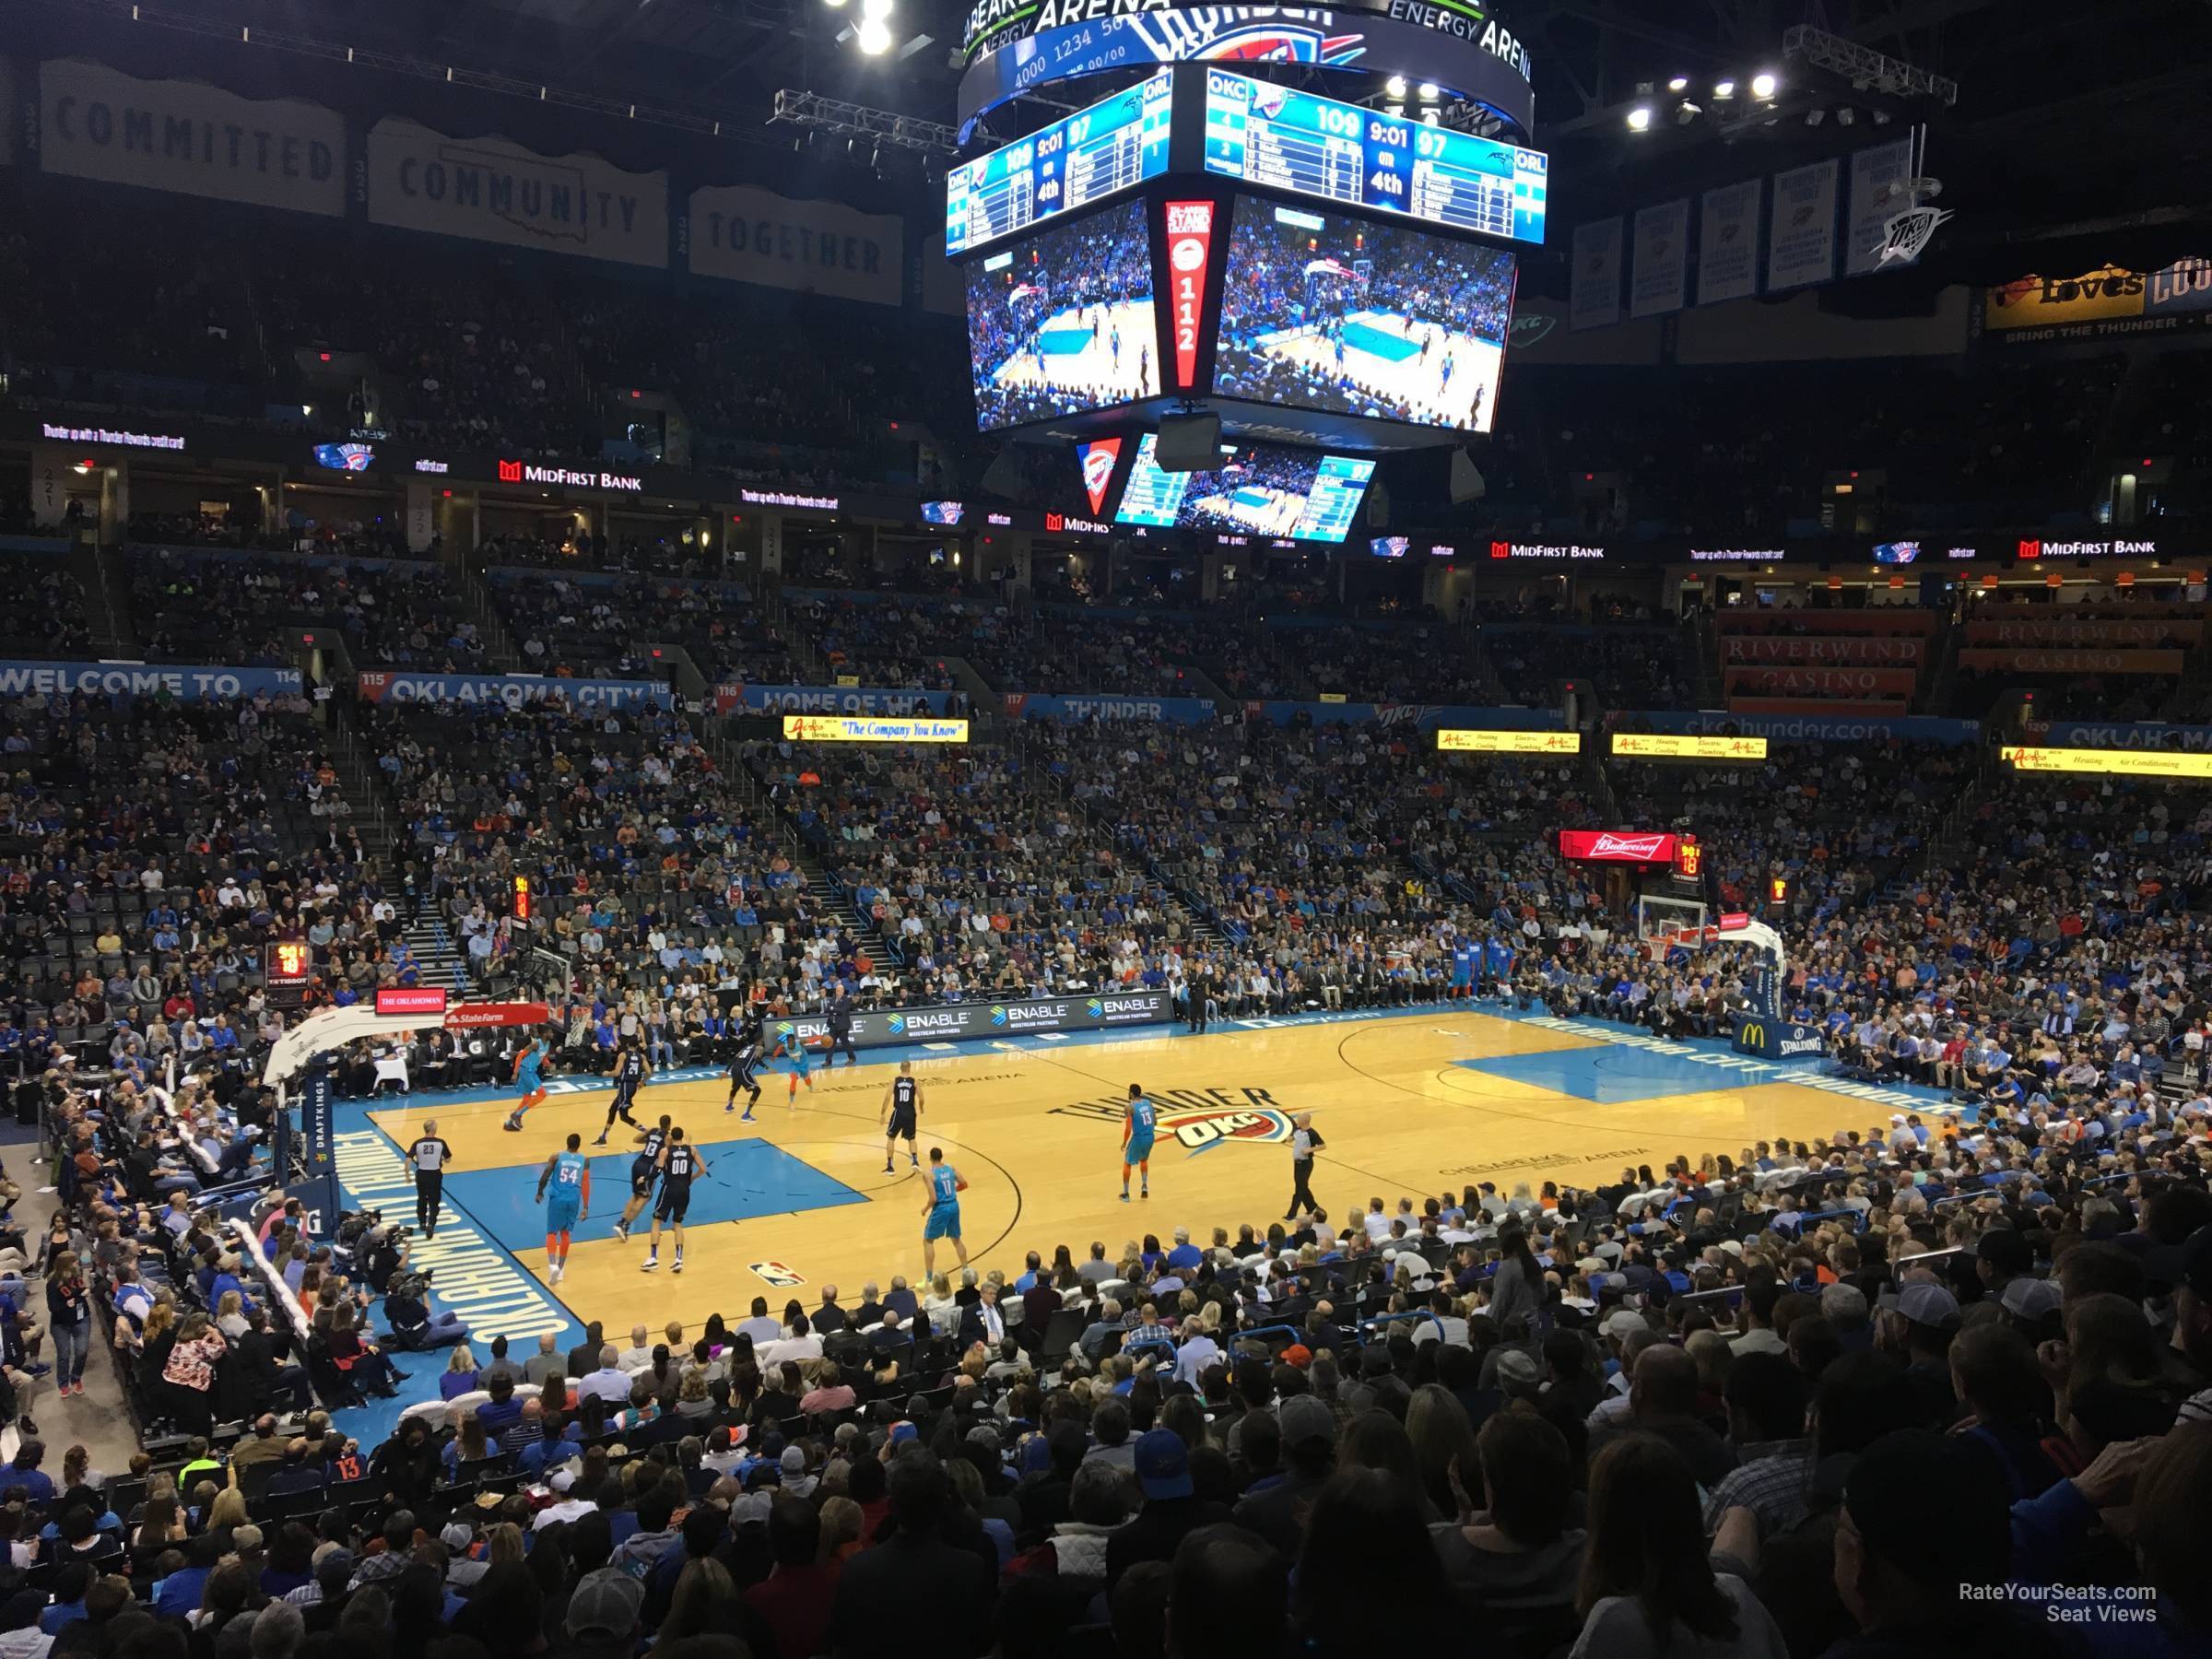 section 107, row u seat view  for basketball - paycom center